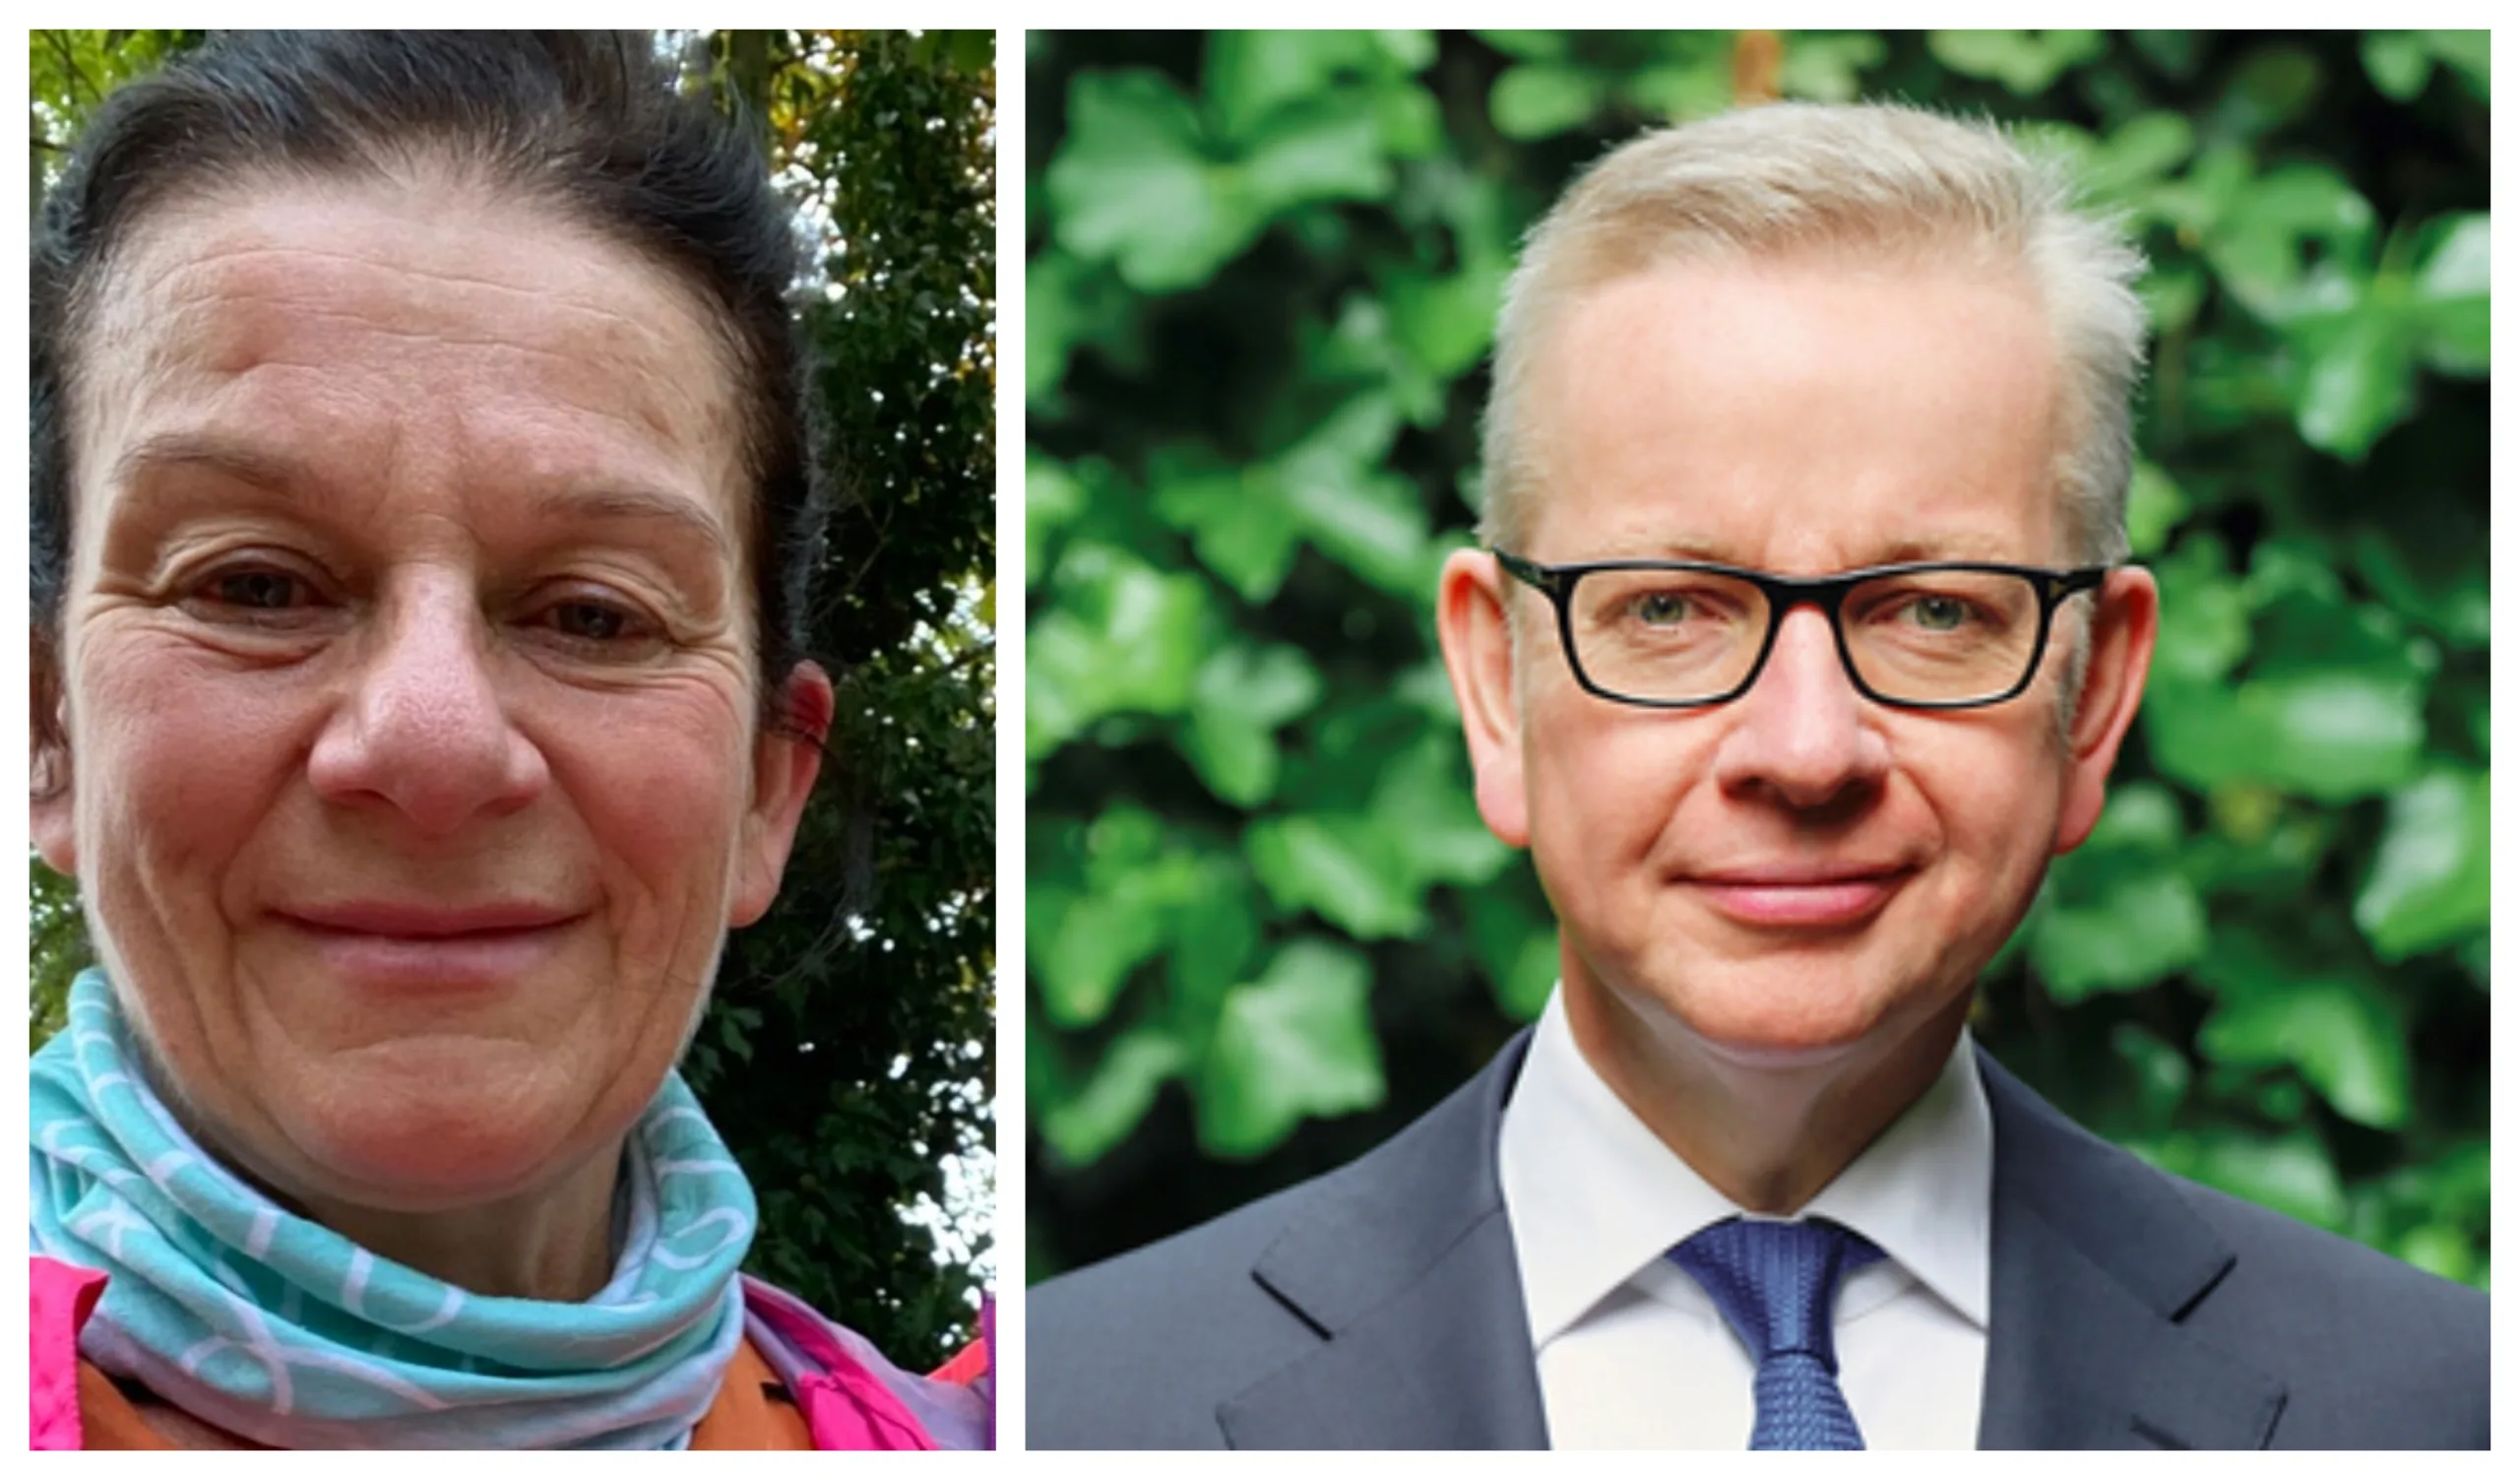 Michael Gove, wants to deliver 1 million new homes nationally, focusing on towns and cities and starting with Cambridge. Cllr Bridget Smith says “level of growth could only be delivered if the challenge over water supply could be solved”